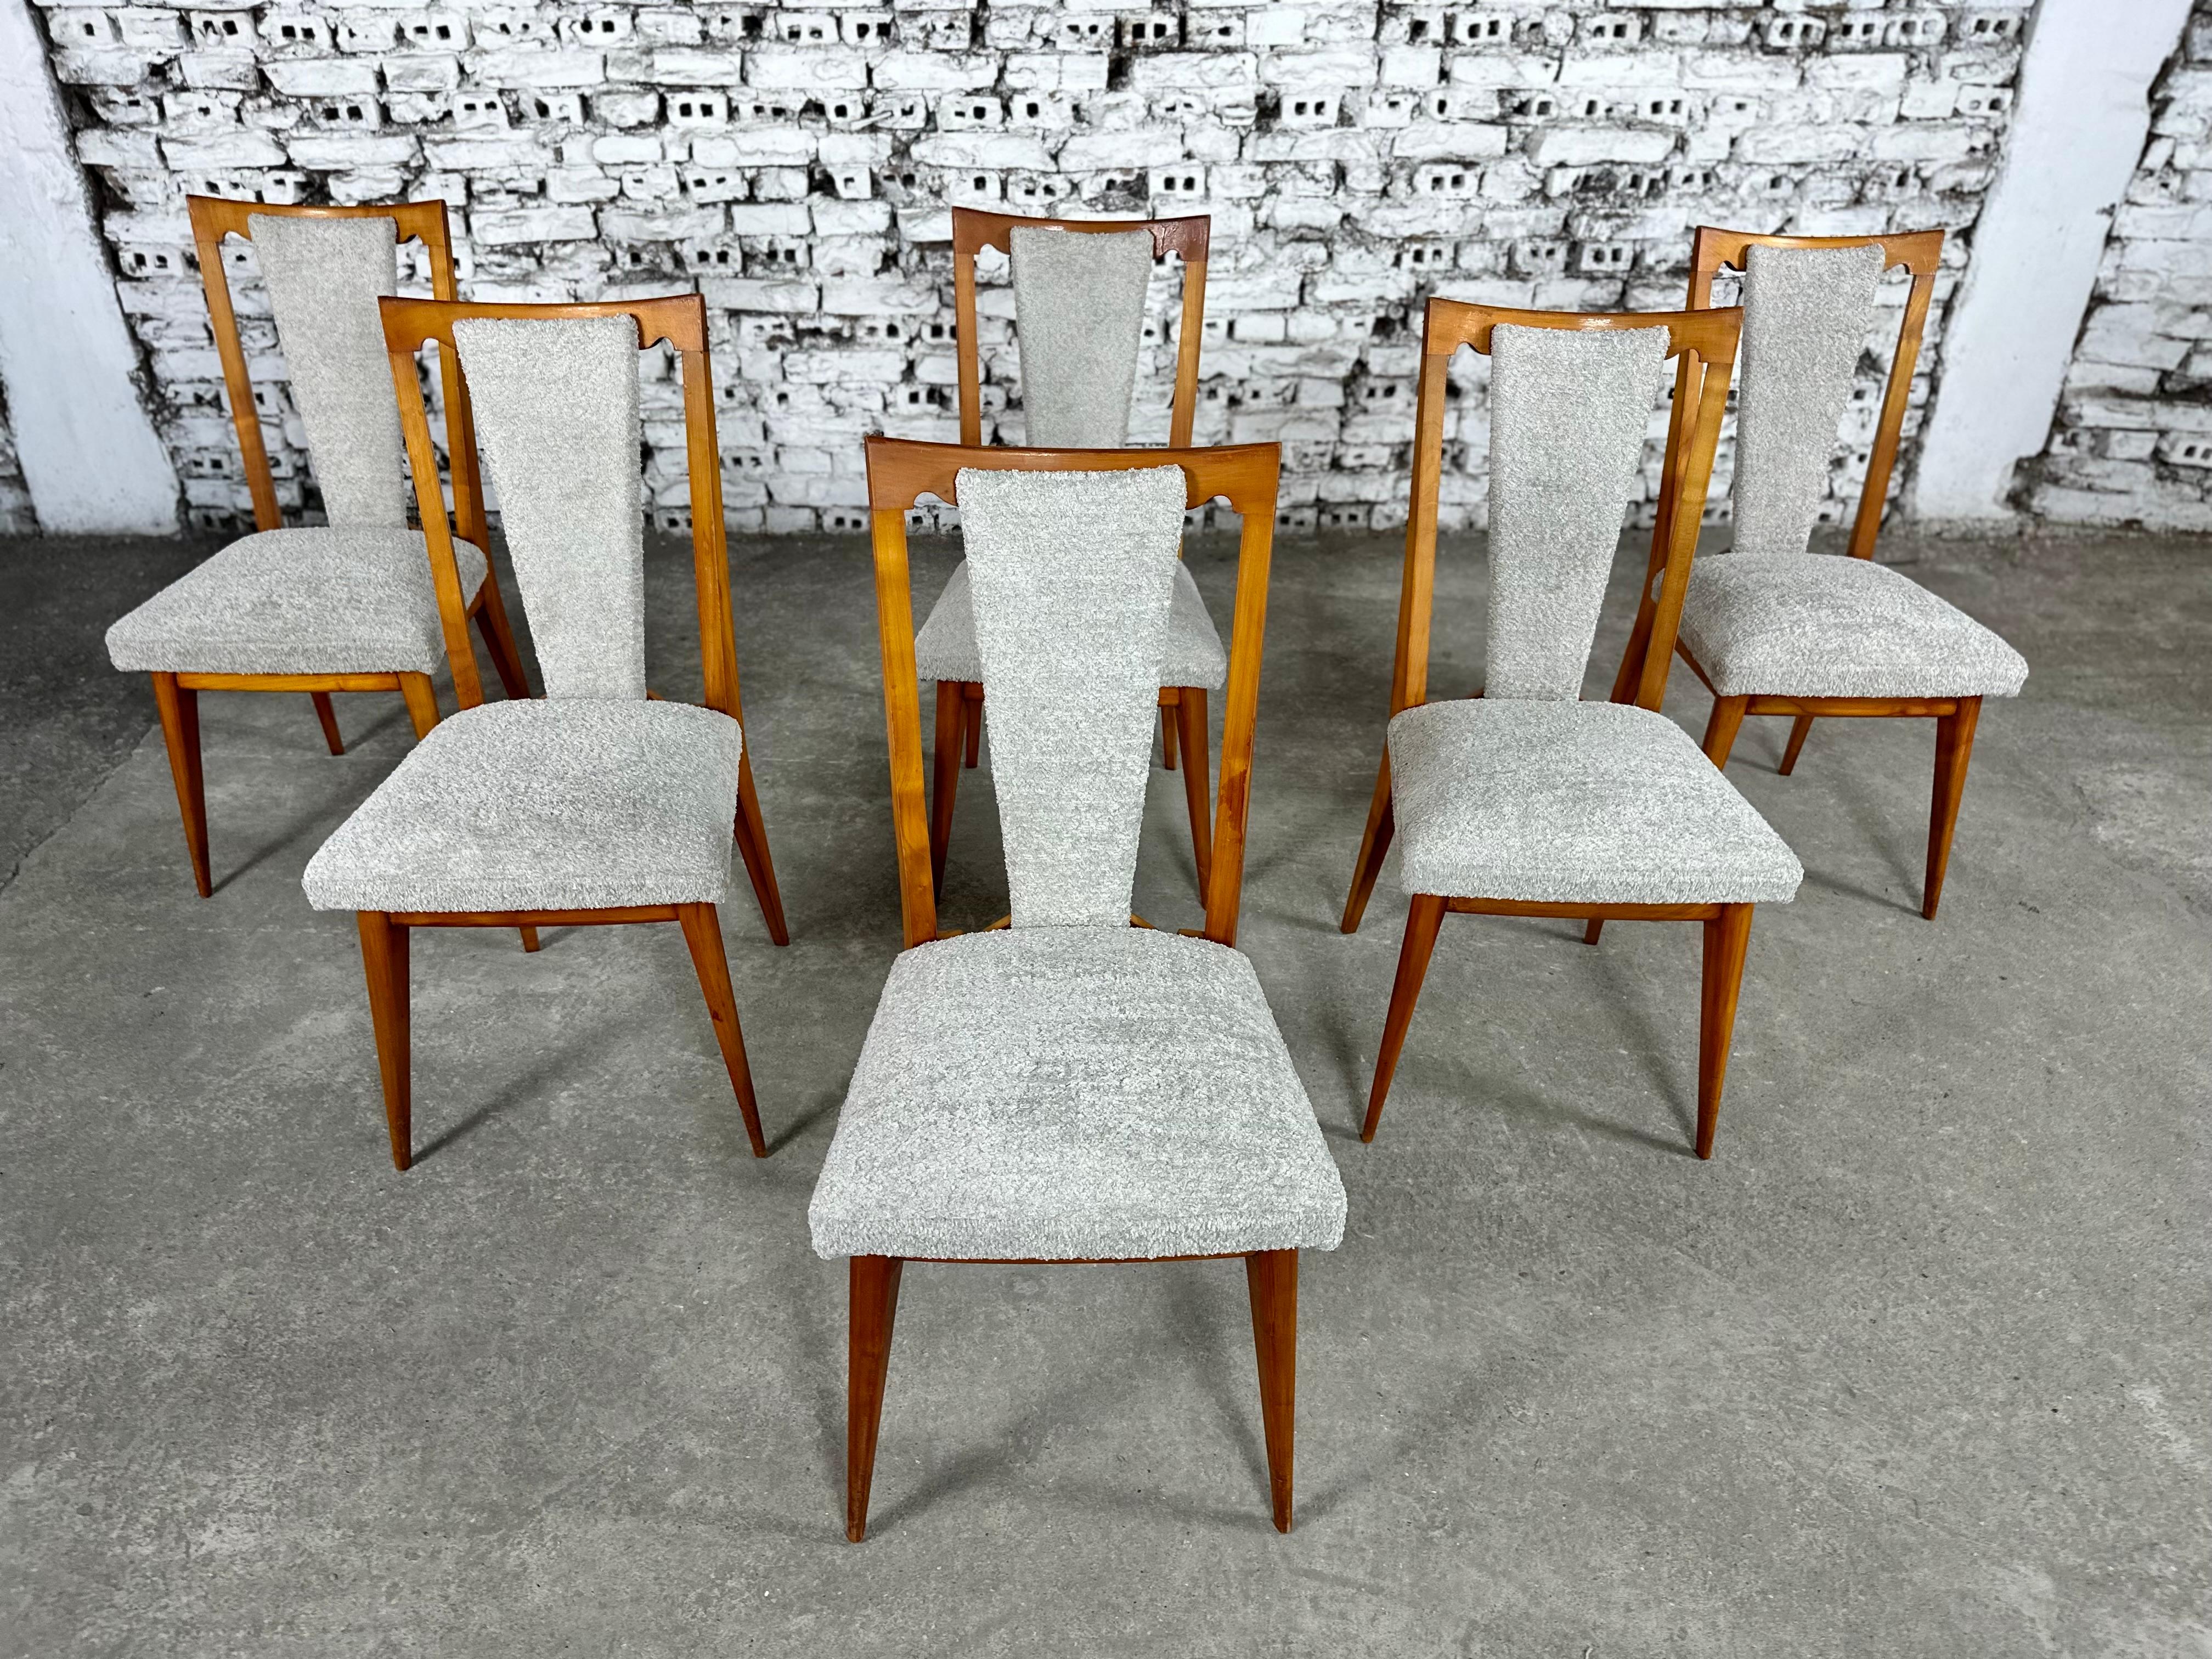 French Art Deco Styled Dining Chairs, Newly Upholstered - Set of 6 For Sale 2